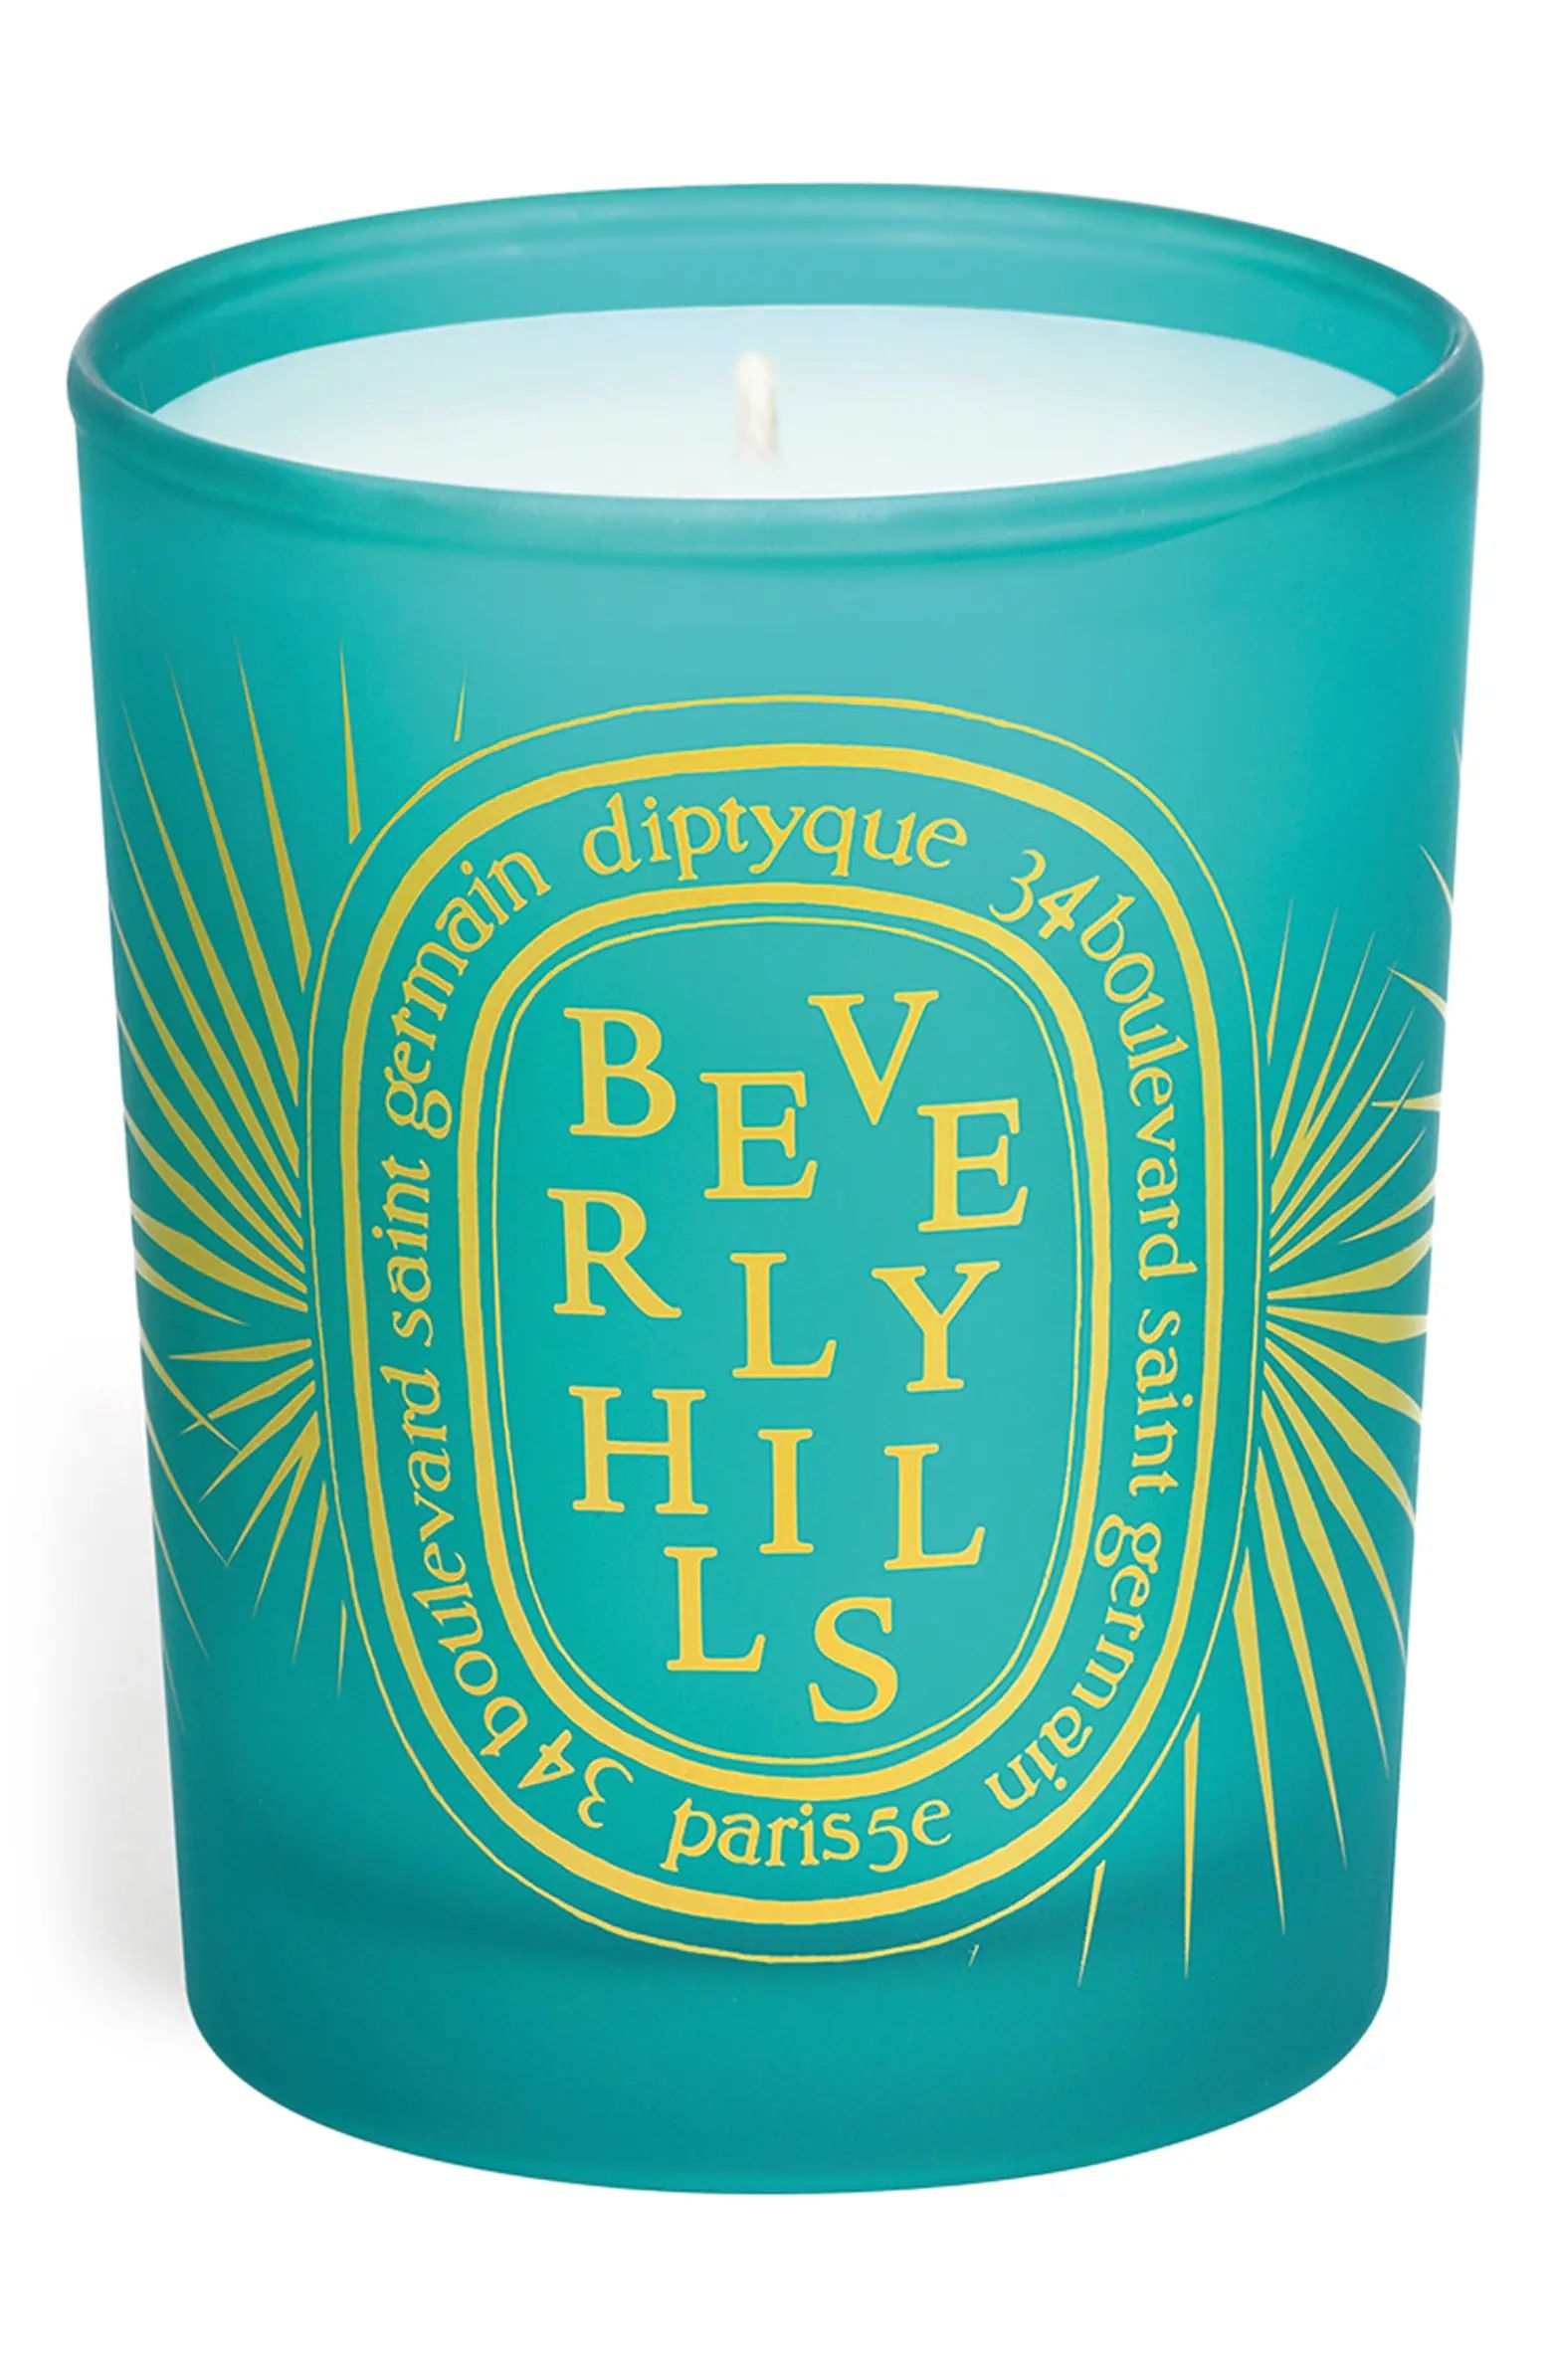 diptyque Beverly Hills City Candle | Nordstrom | Nordstrom